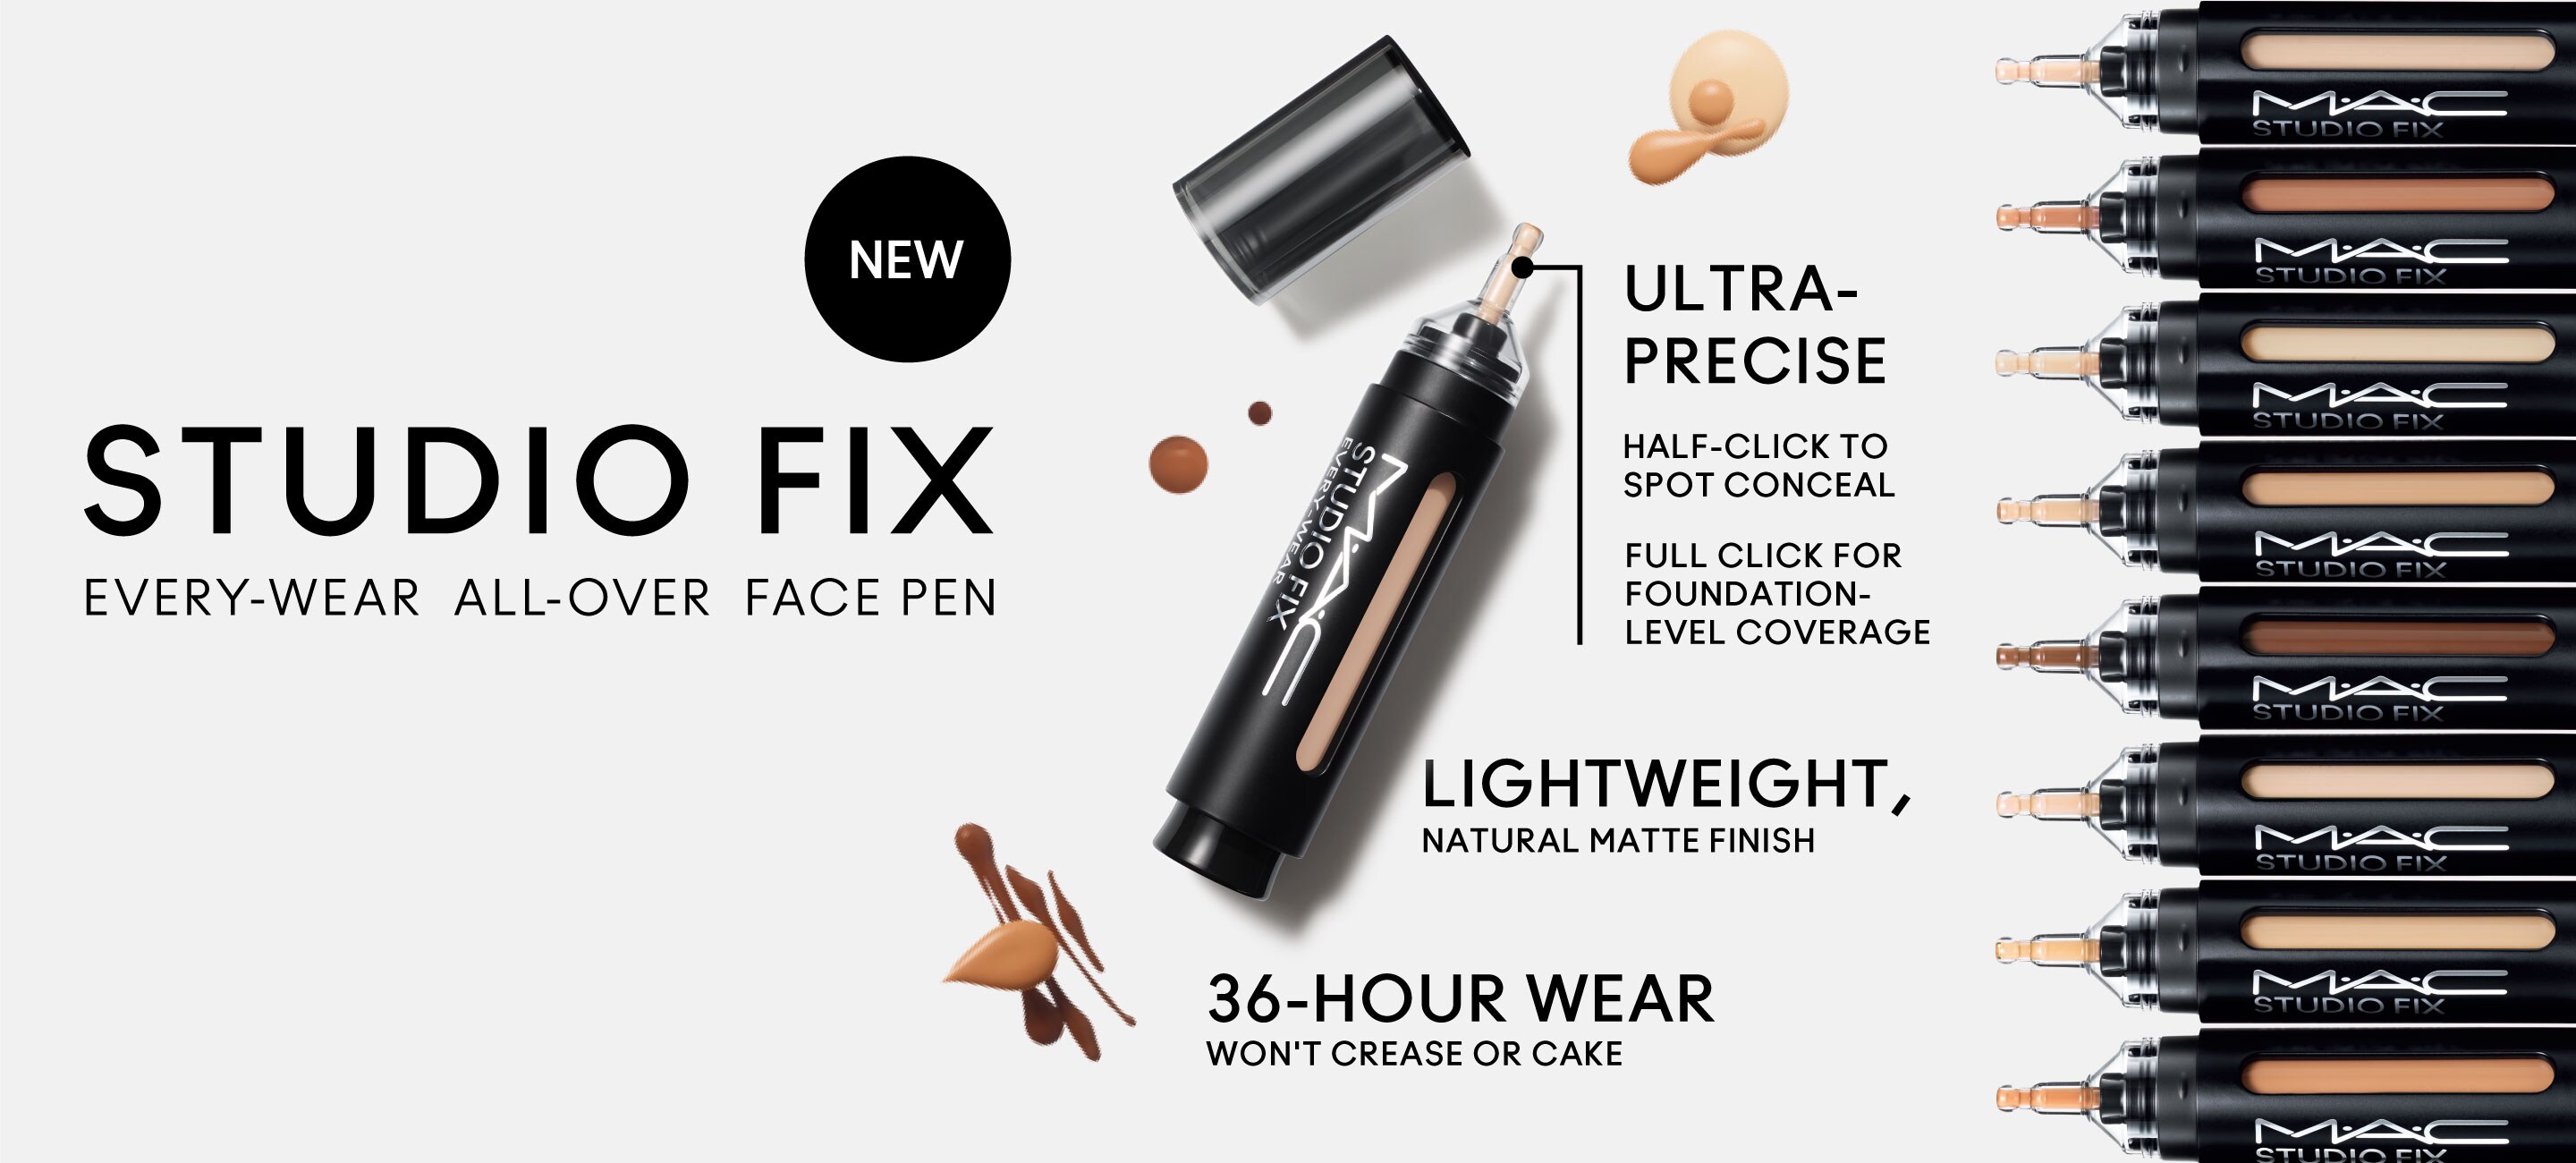 M·A·C Studio Fix Every-Wear All-Over Face Pen